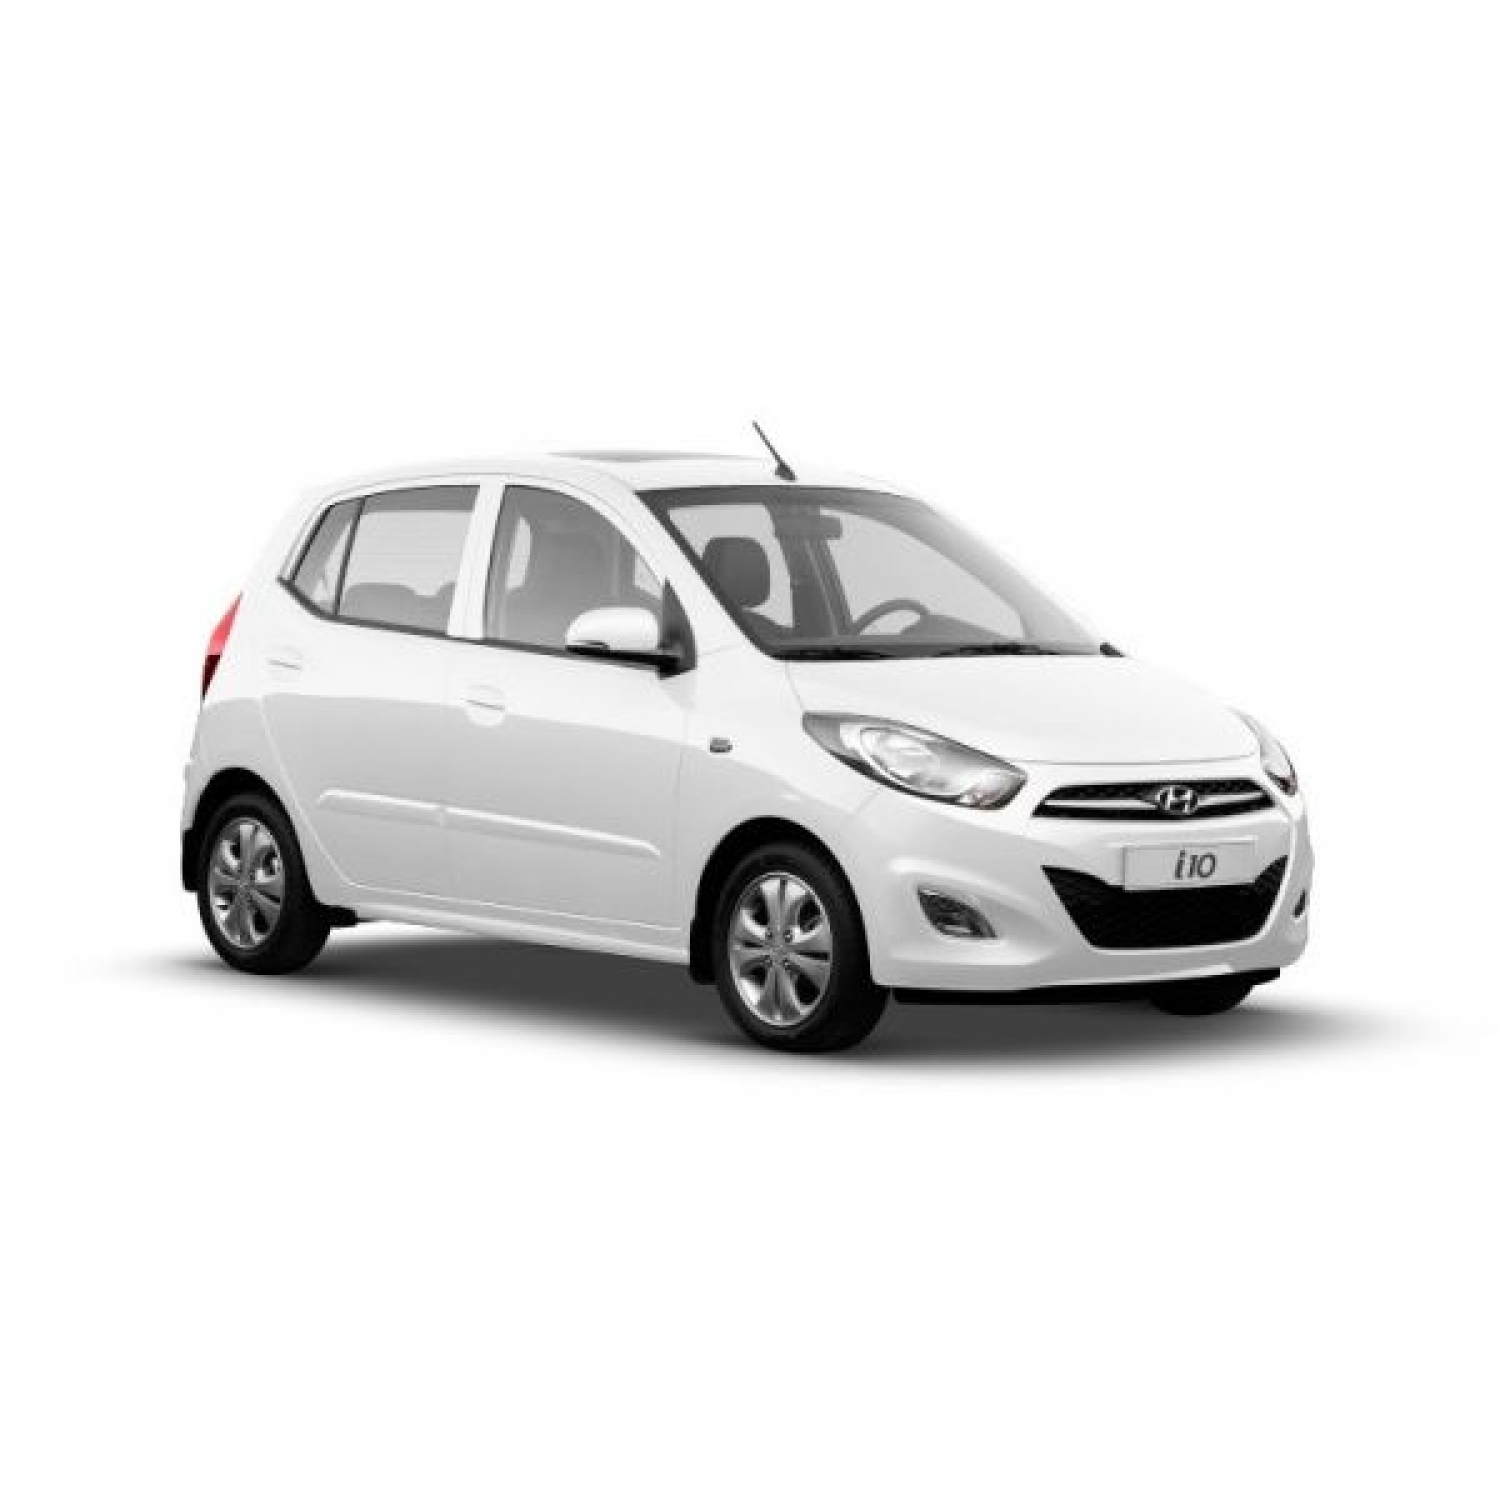 Buy Hyundai i10 Accessories and Parts Online at Discounted Price in India 